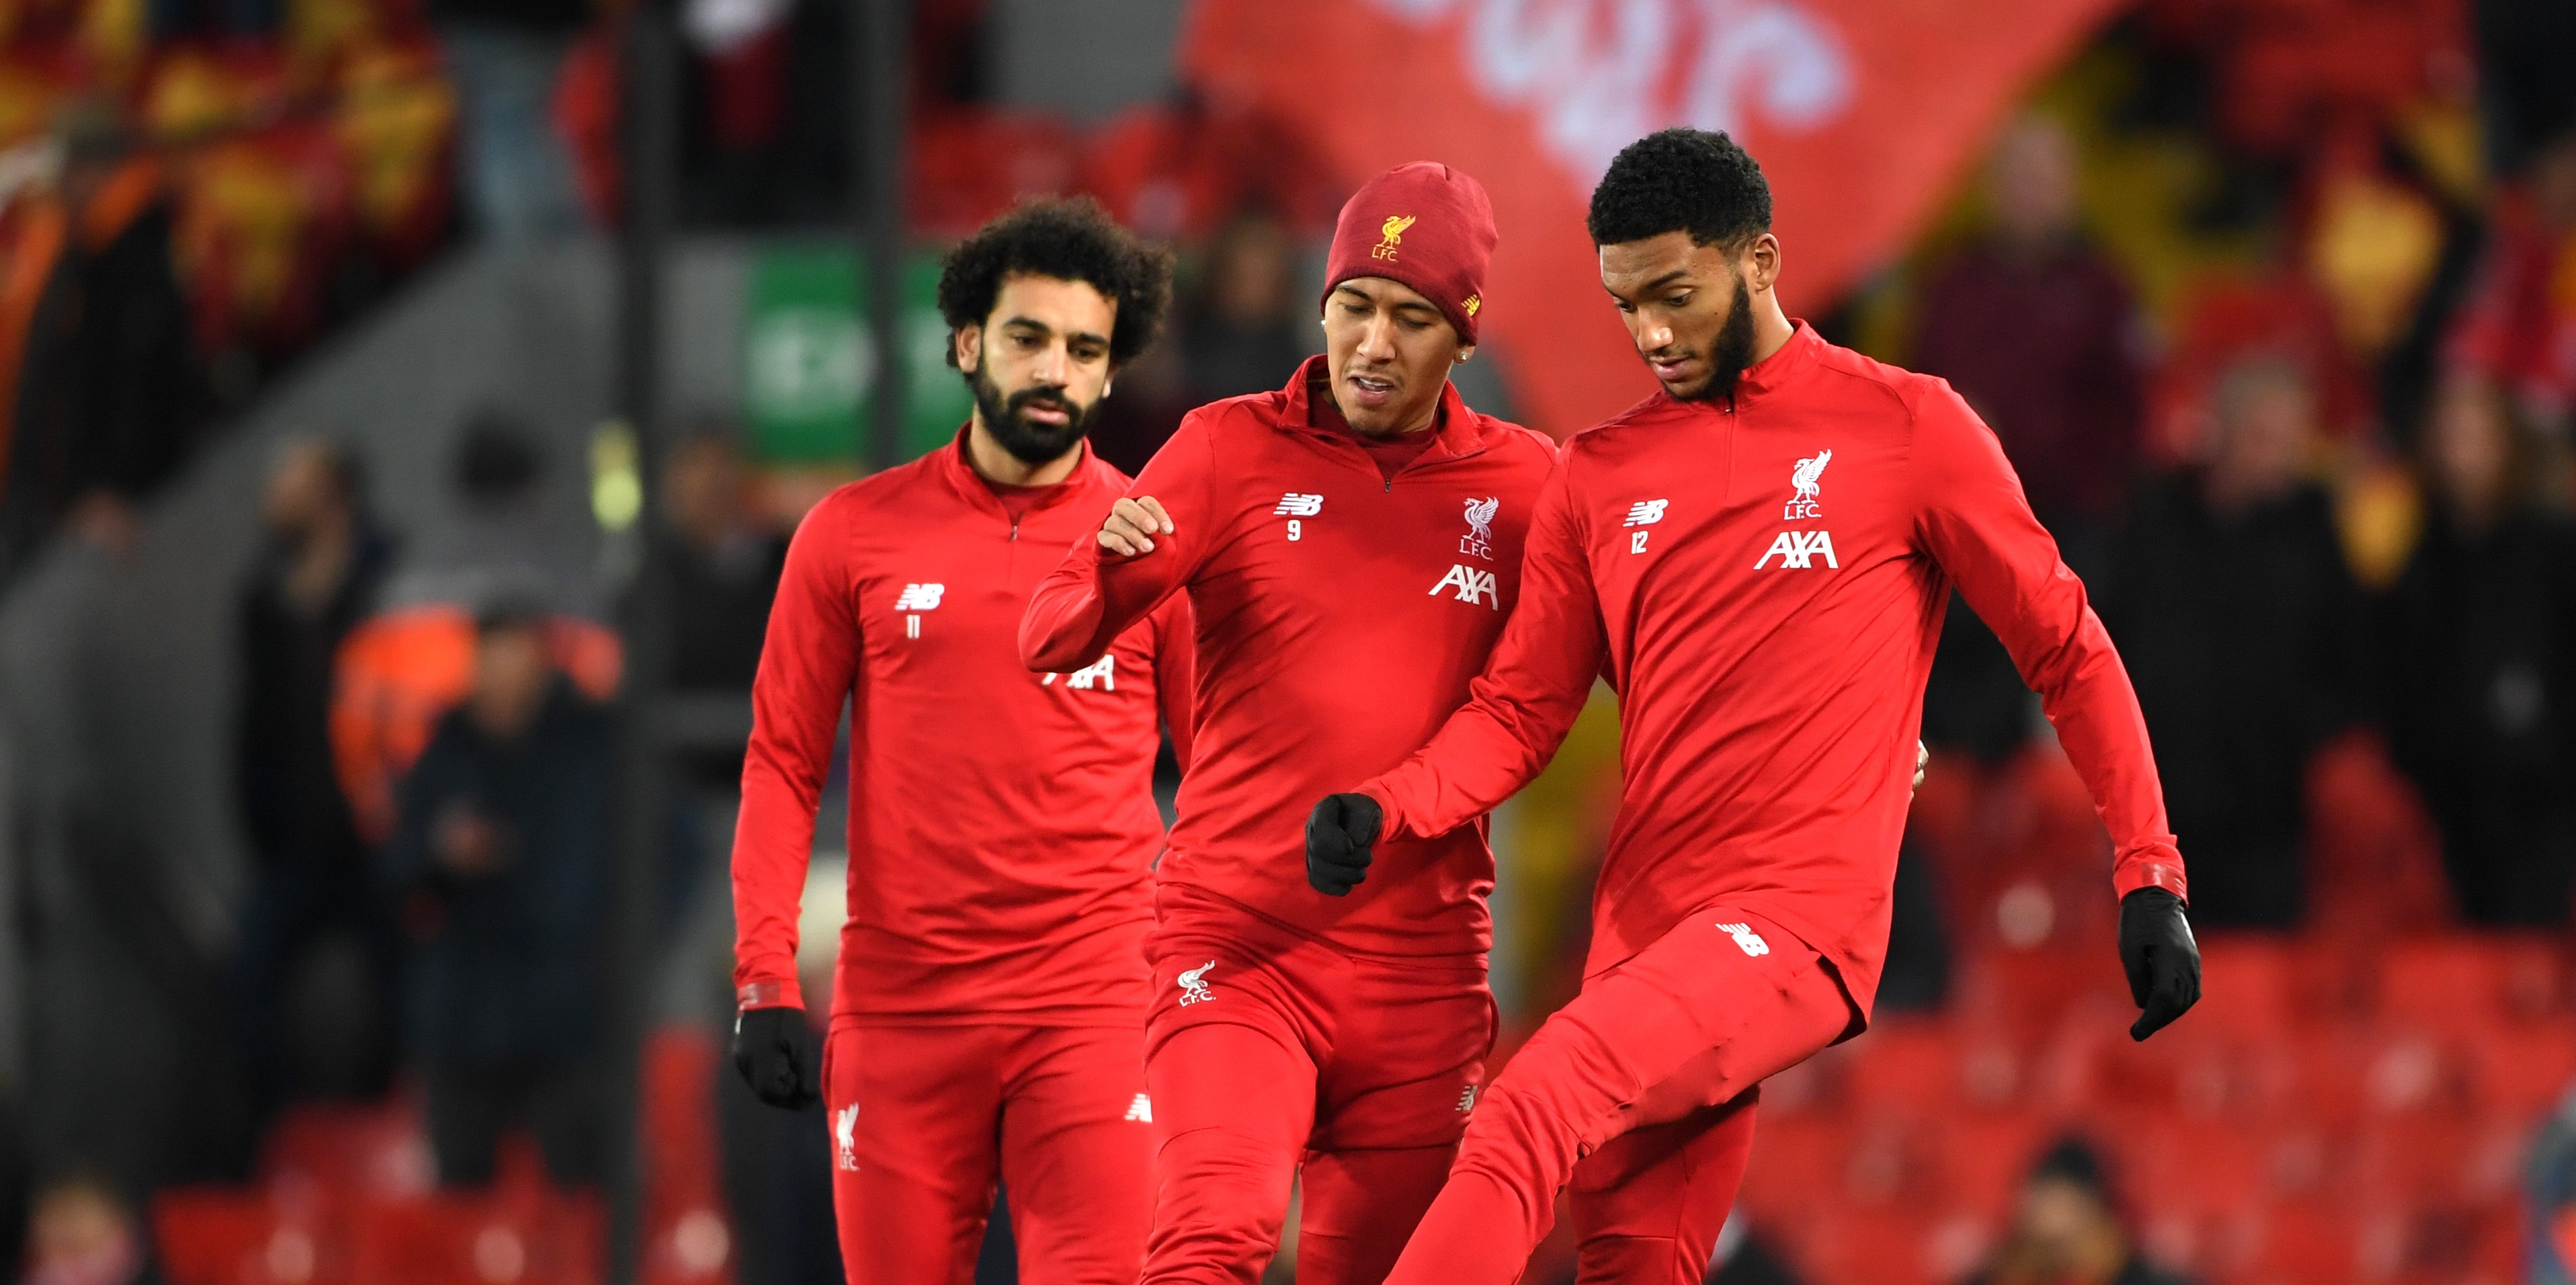 Julian Ward tasked with nailing down contract negotiations for Liverpool star linked with Anfield exit – could lead to 25-year-old’s departure